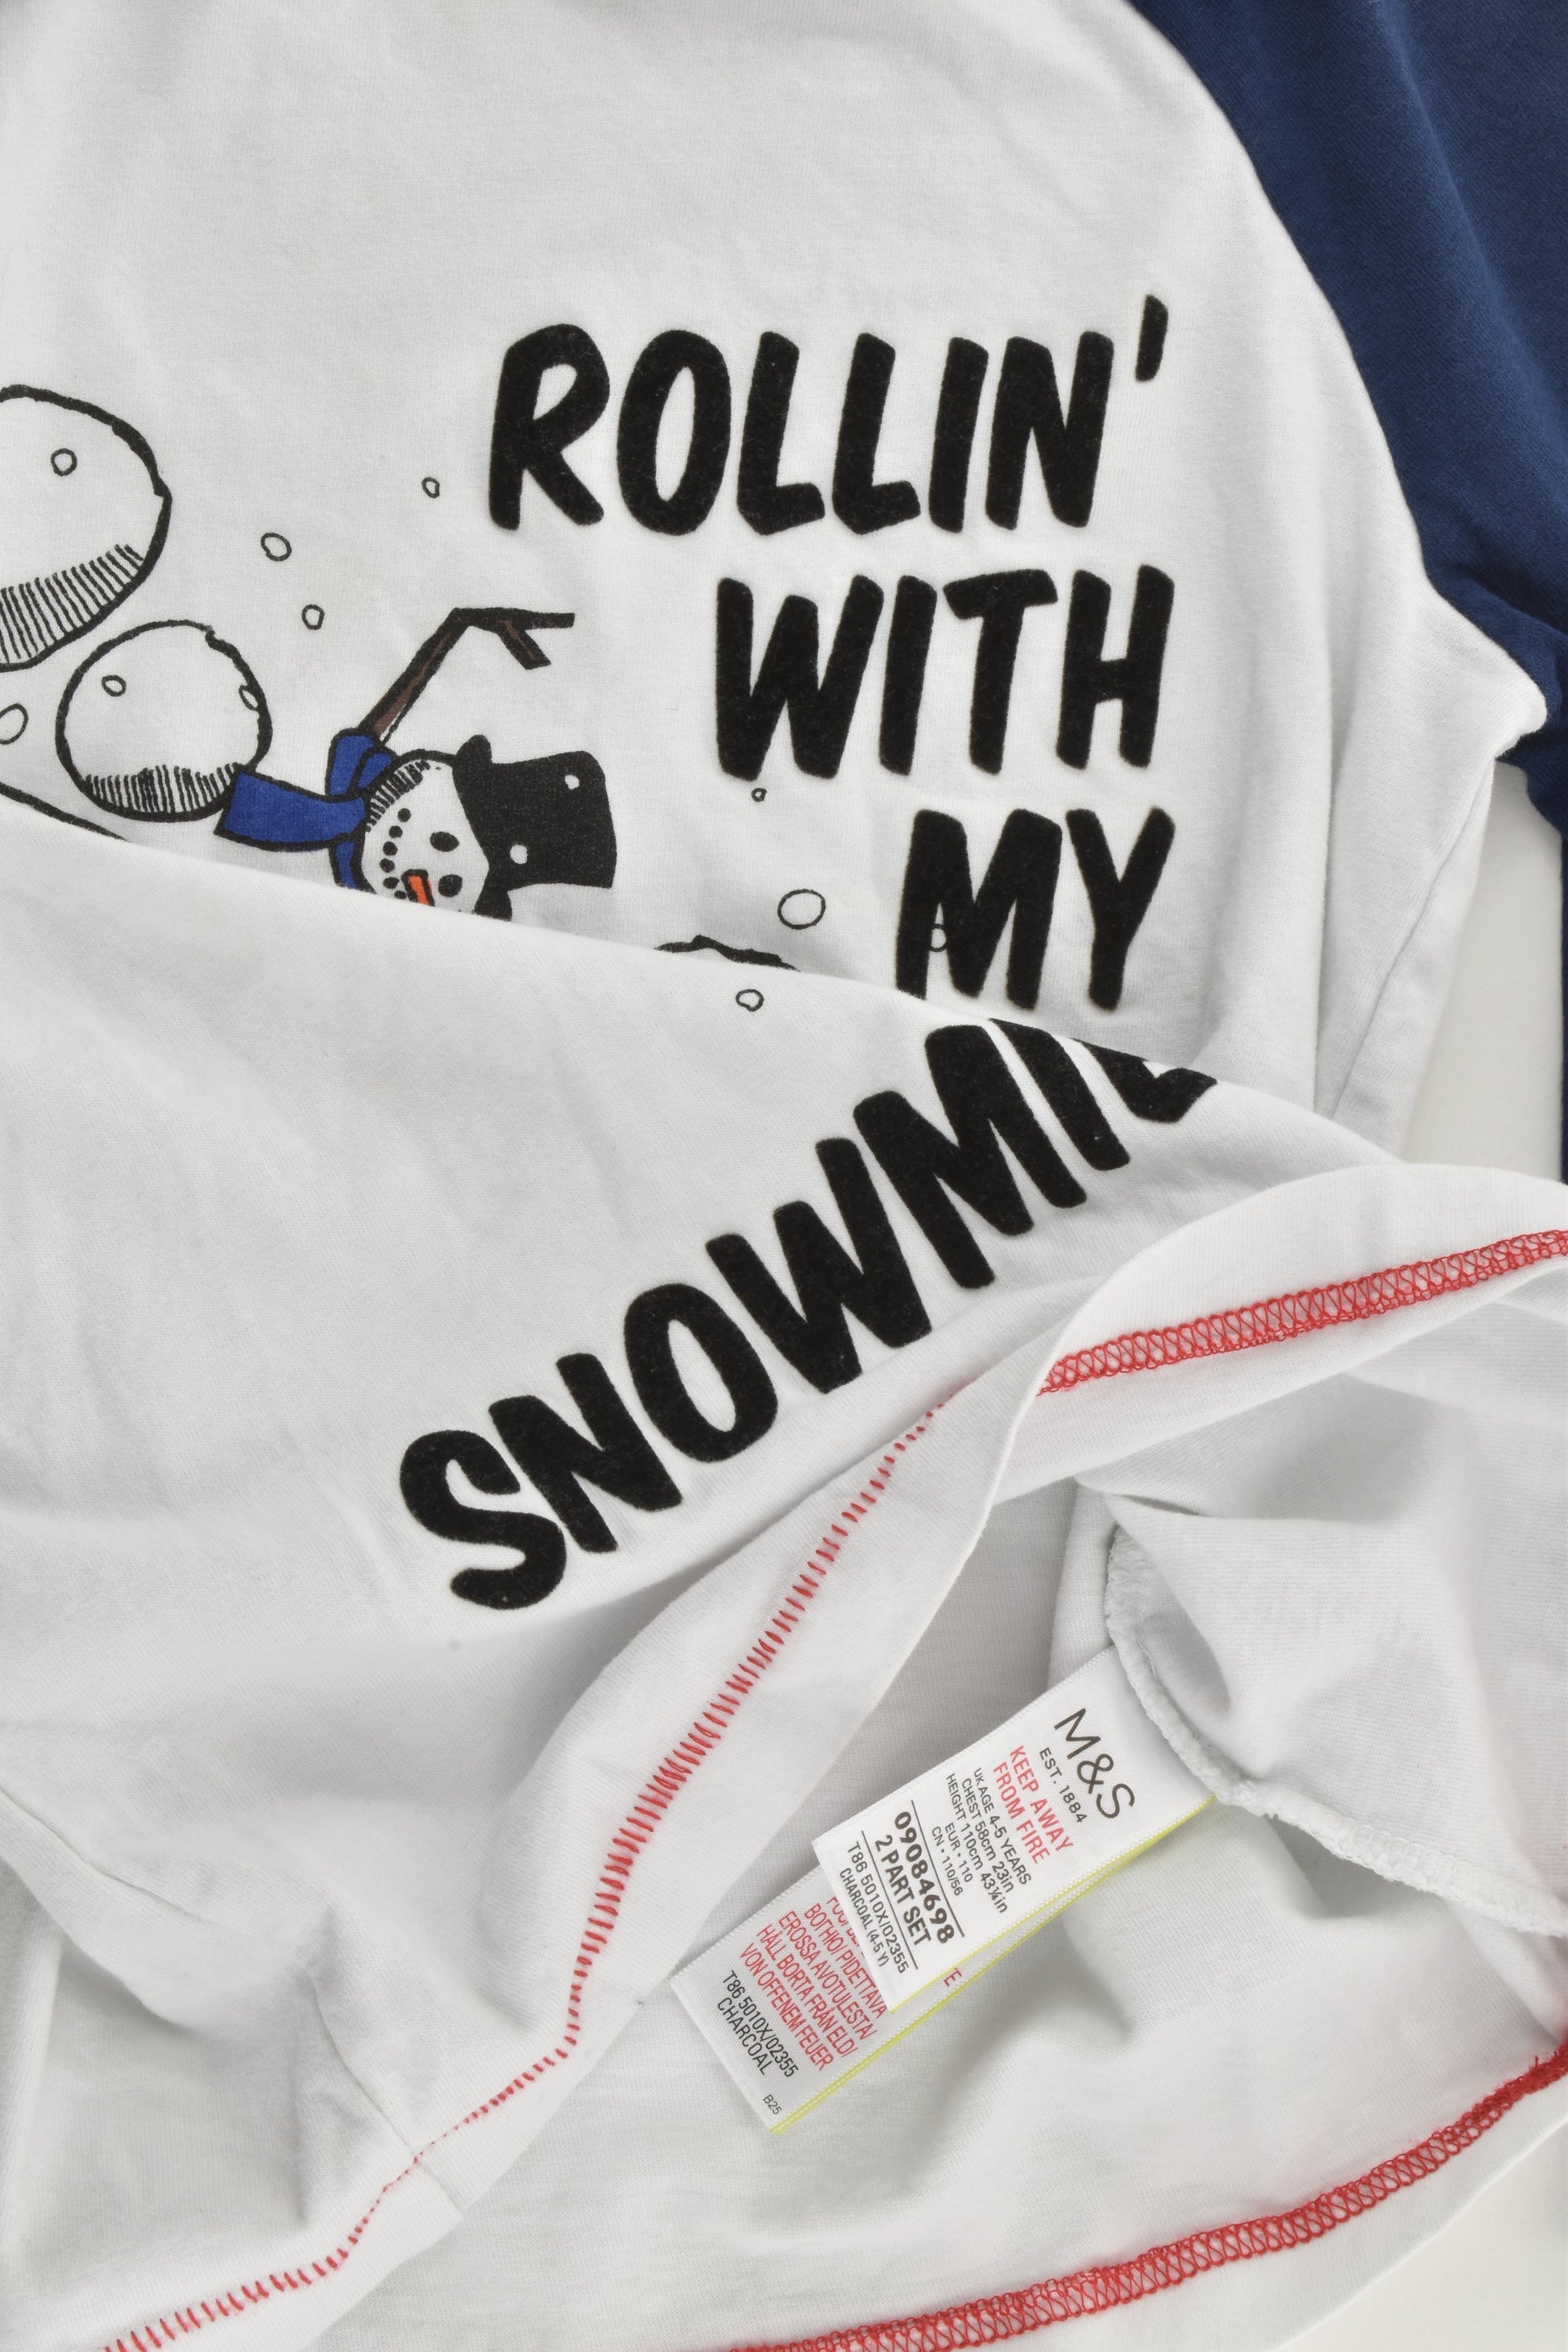 M&S Size 4-5 (110 cm) Rollin' With My Snowmies Top